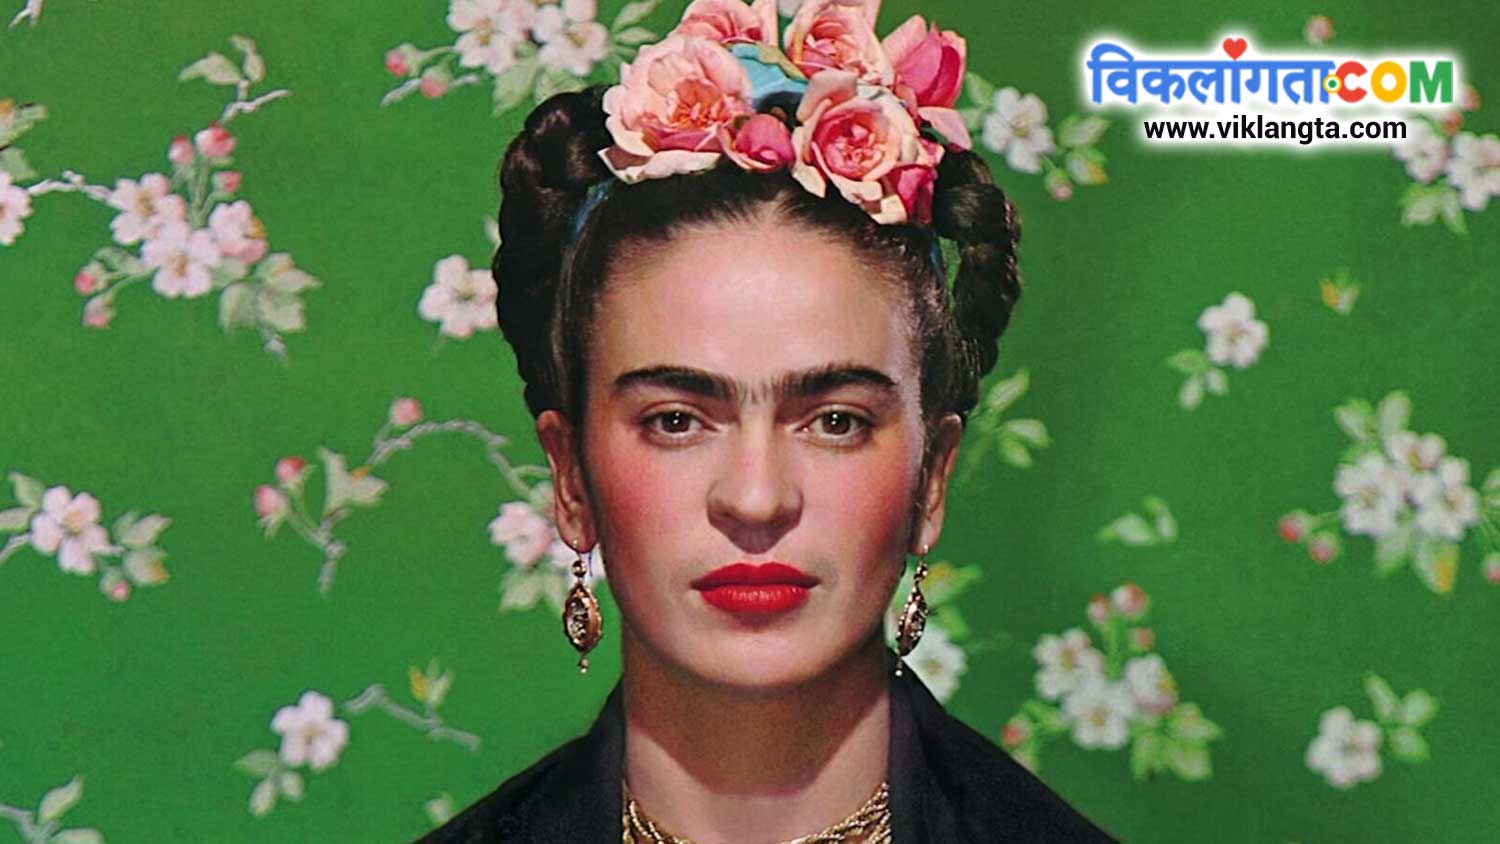 famous disabled person in the world Frieda Kahlo